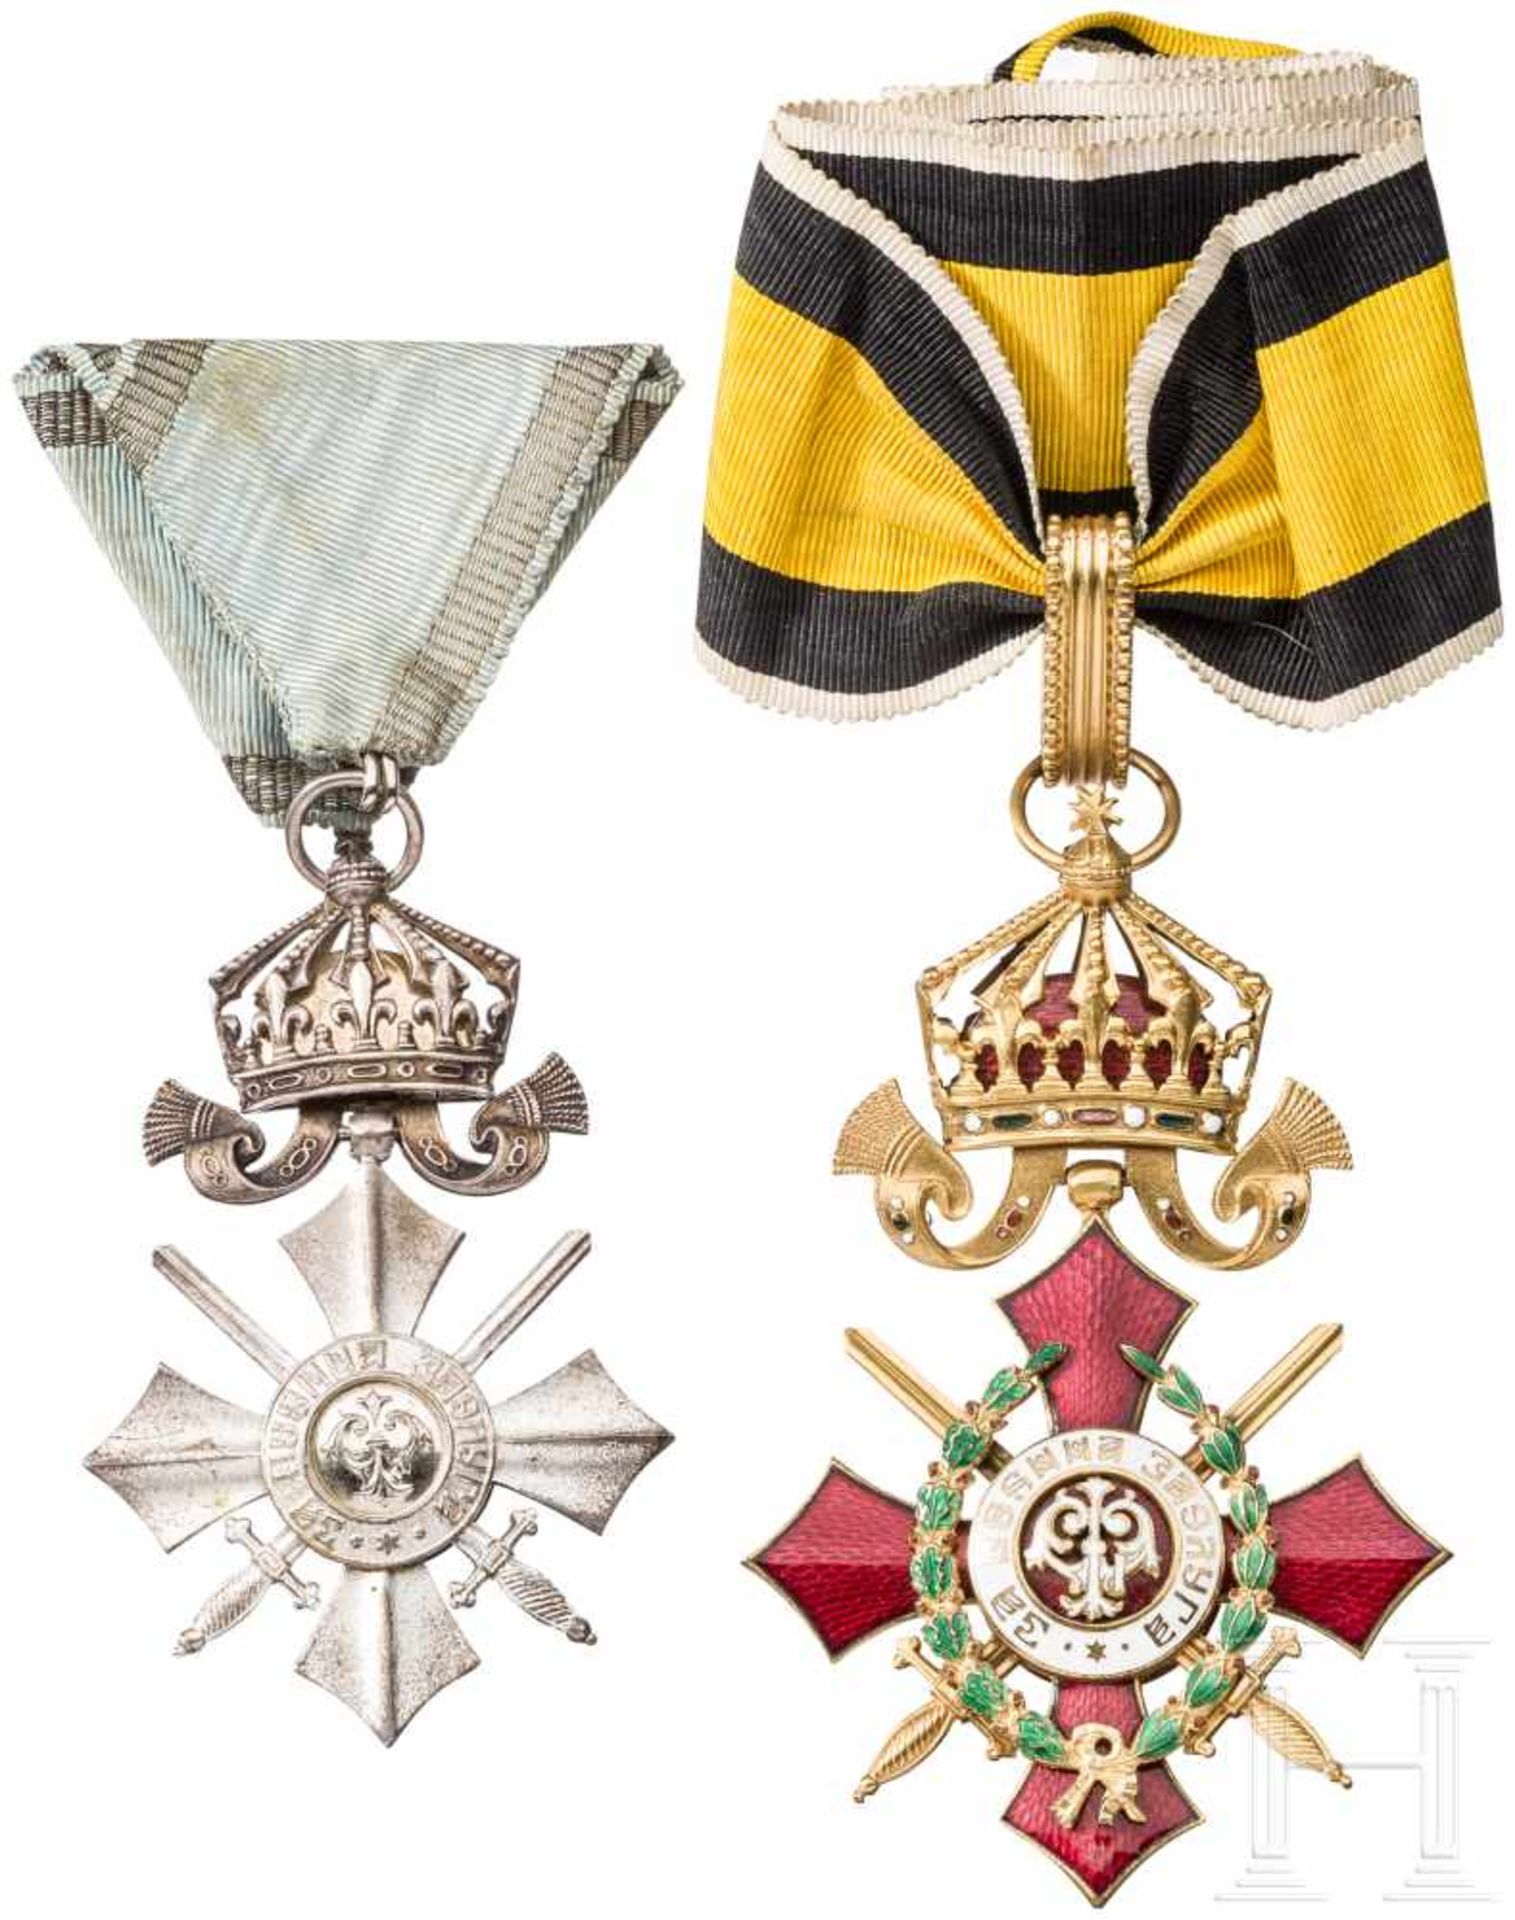 Military Merit Order 2nd class with war decoration, BulgariaVergoldetes, farbig emailliertes